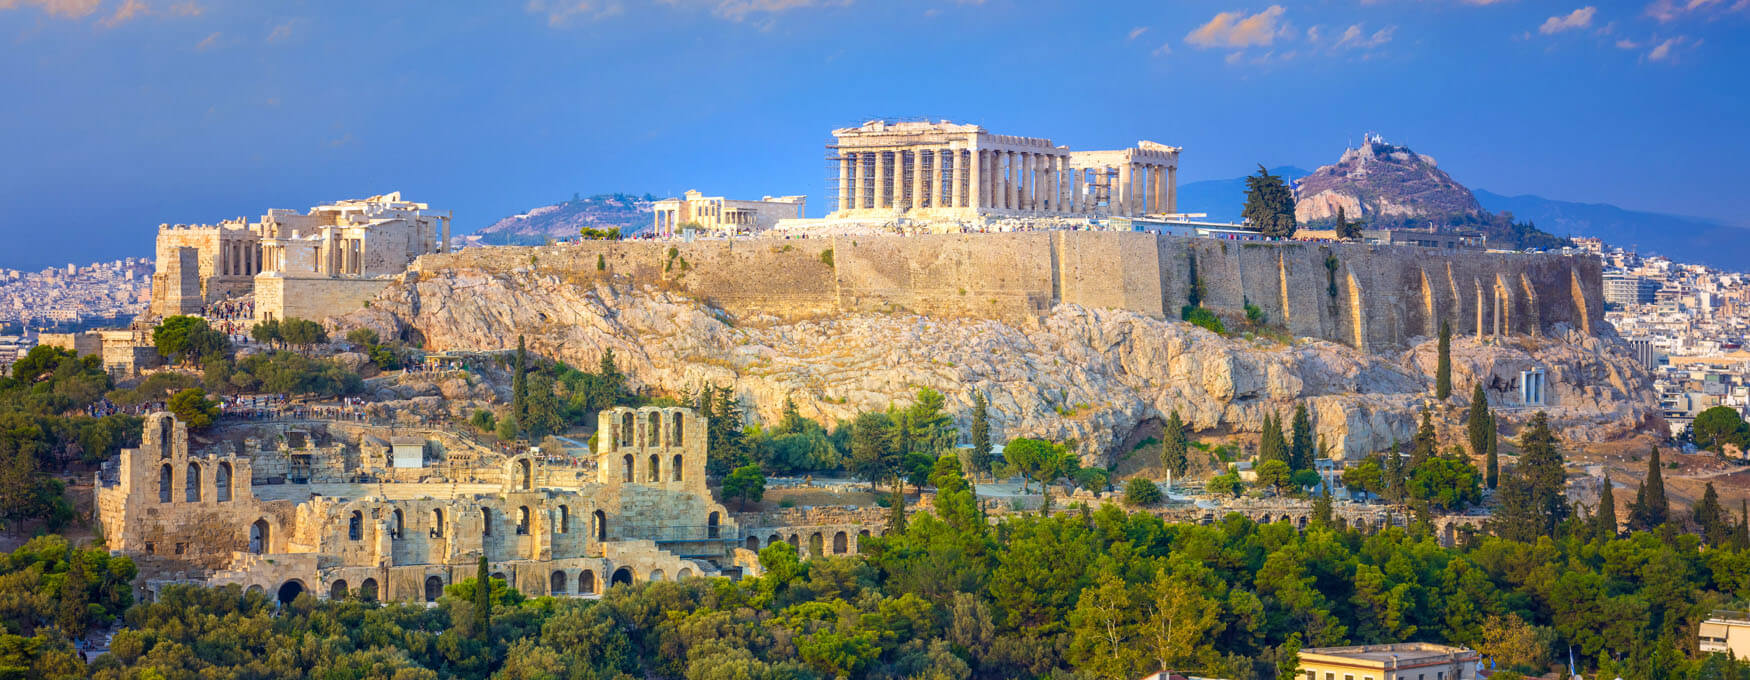 Discover More About Tourism in Greece's Most Visited Region